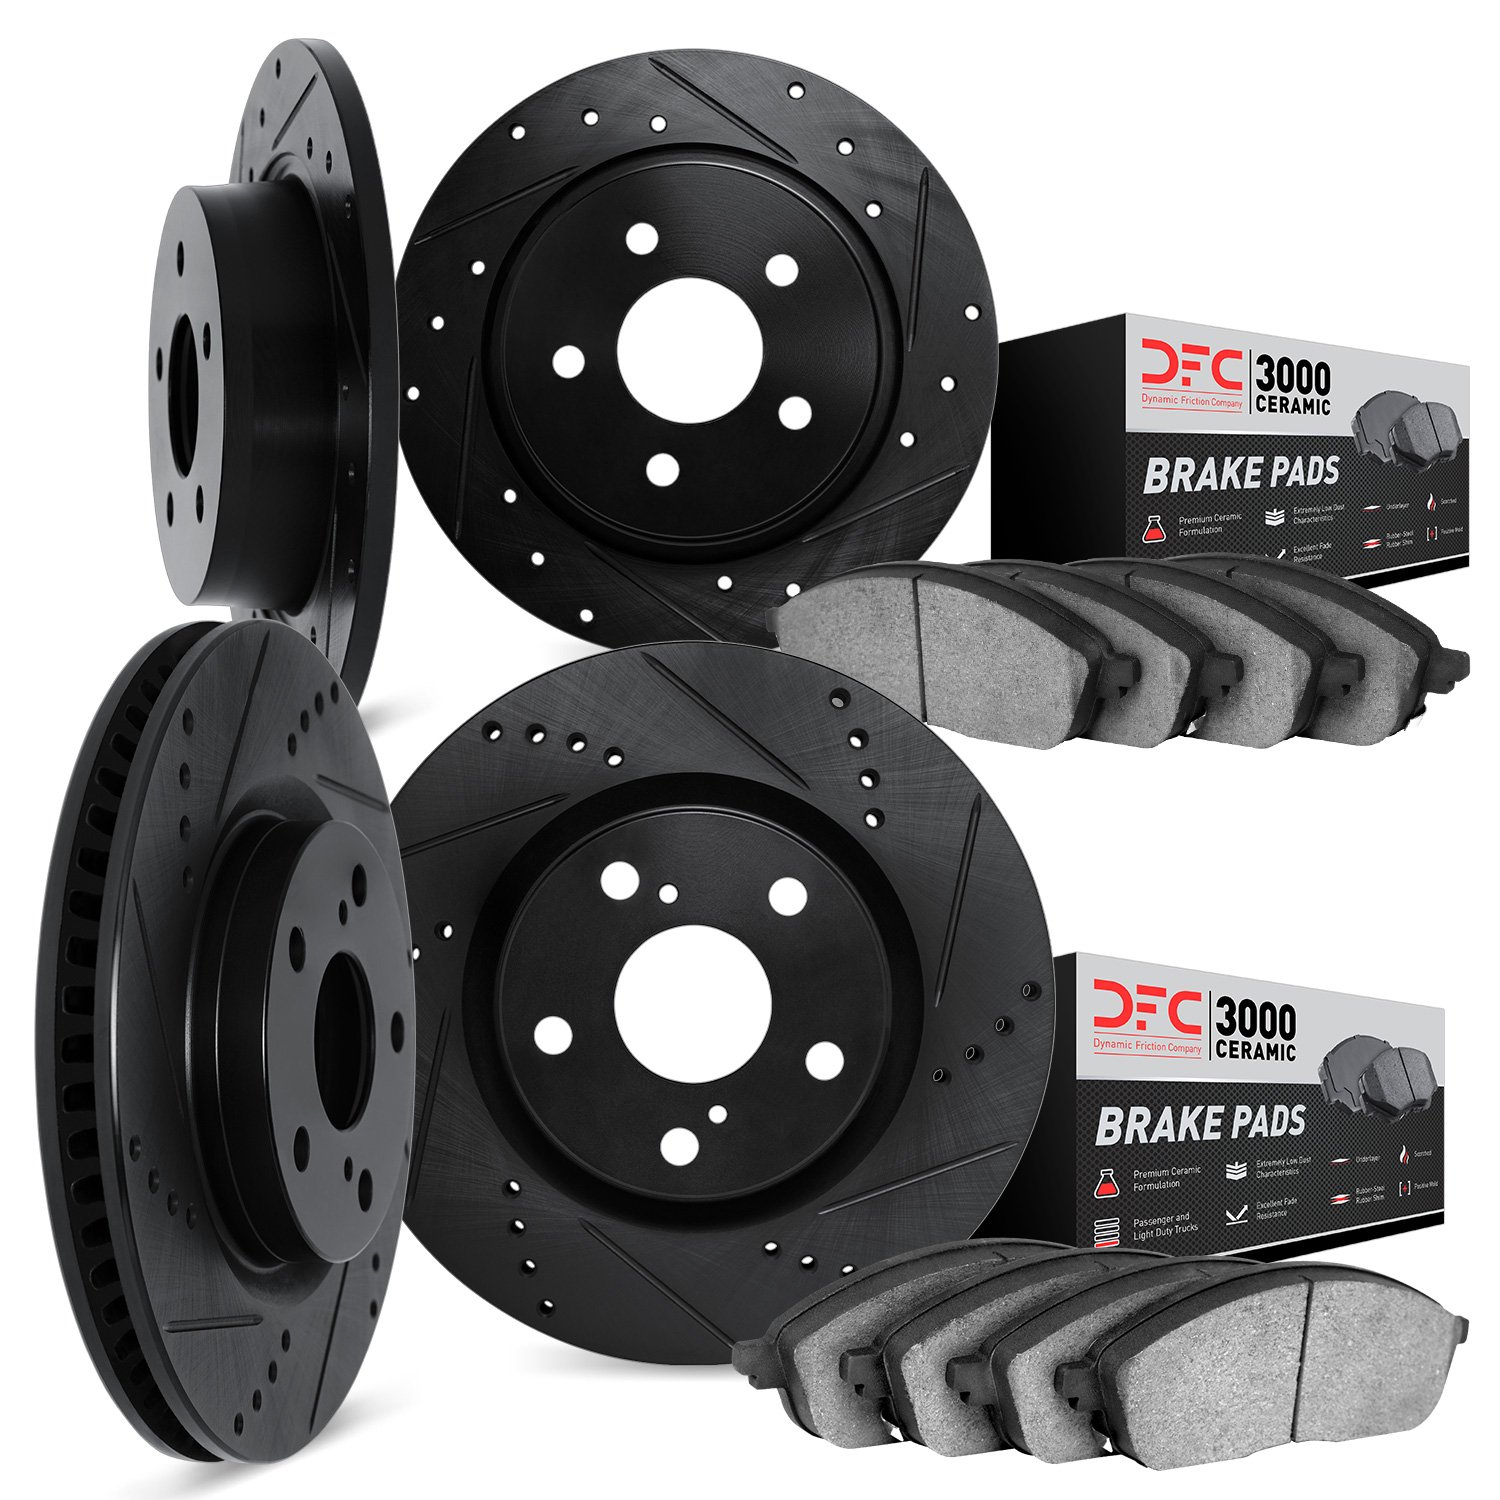 8304-59057 Drilled/Slotted Brake Rotors with 3000-Series Ceramic Brake Pads Kit [Black], 2006-2007 Acura/Honda, Position: Front